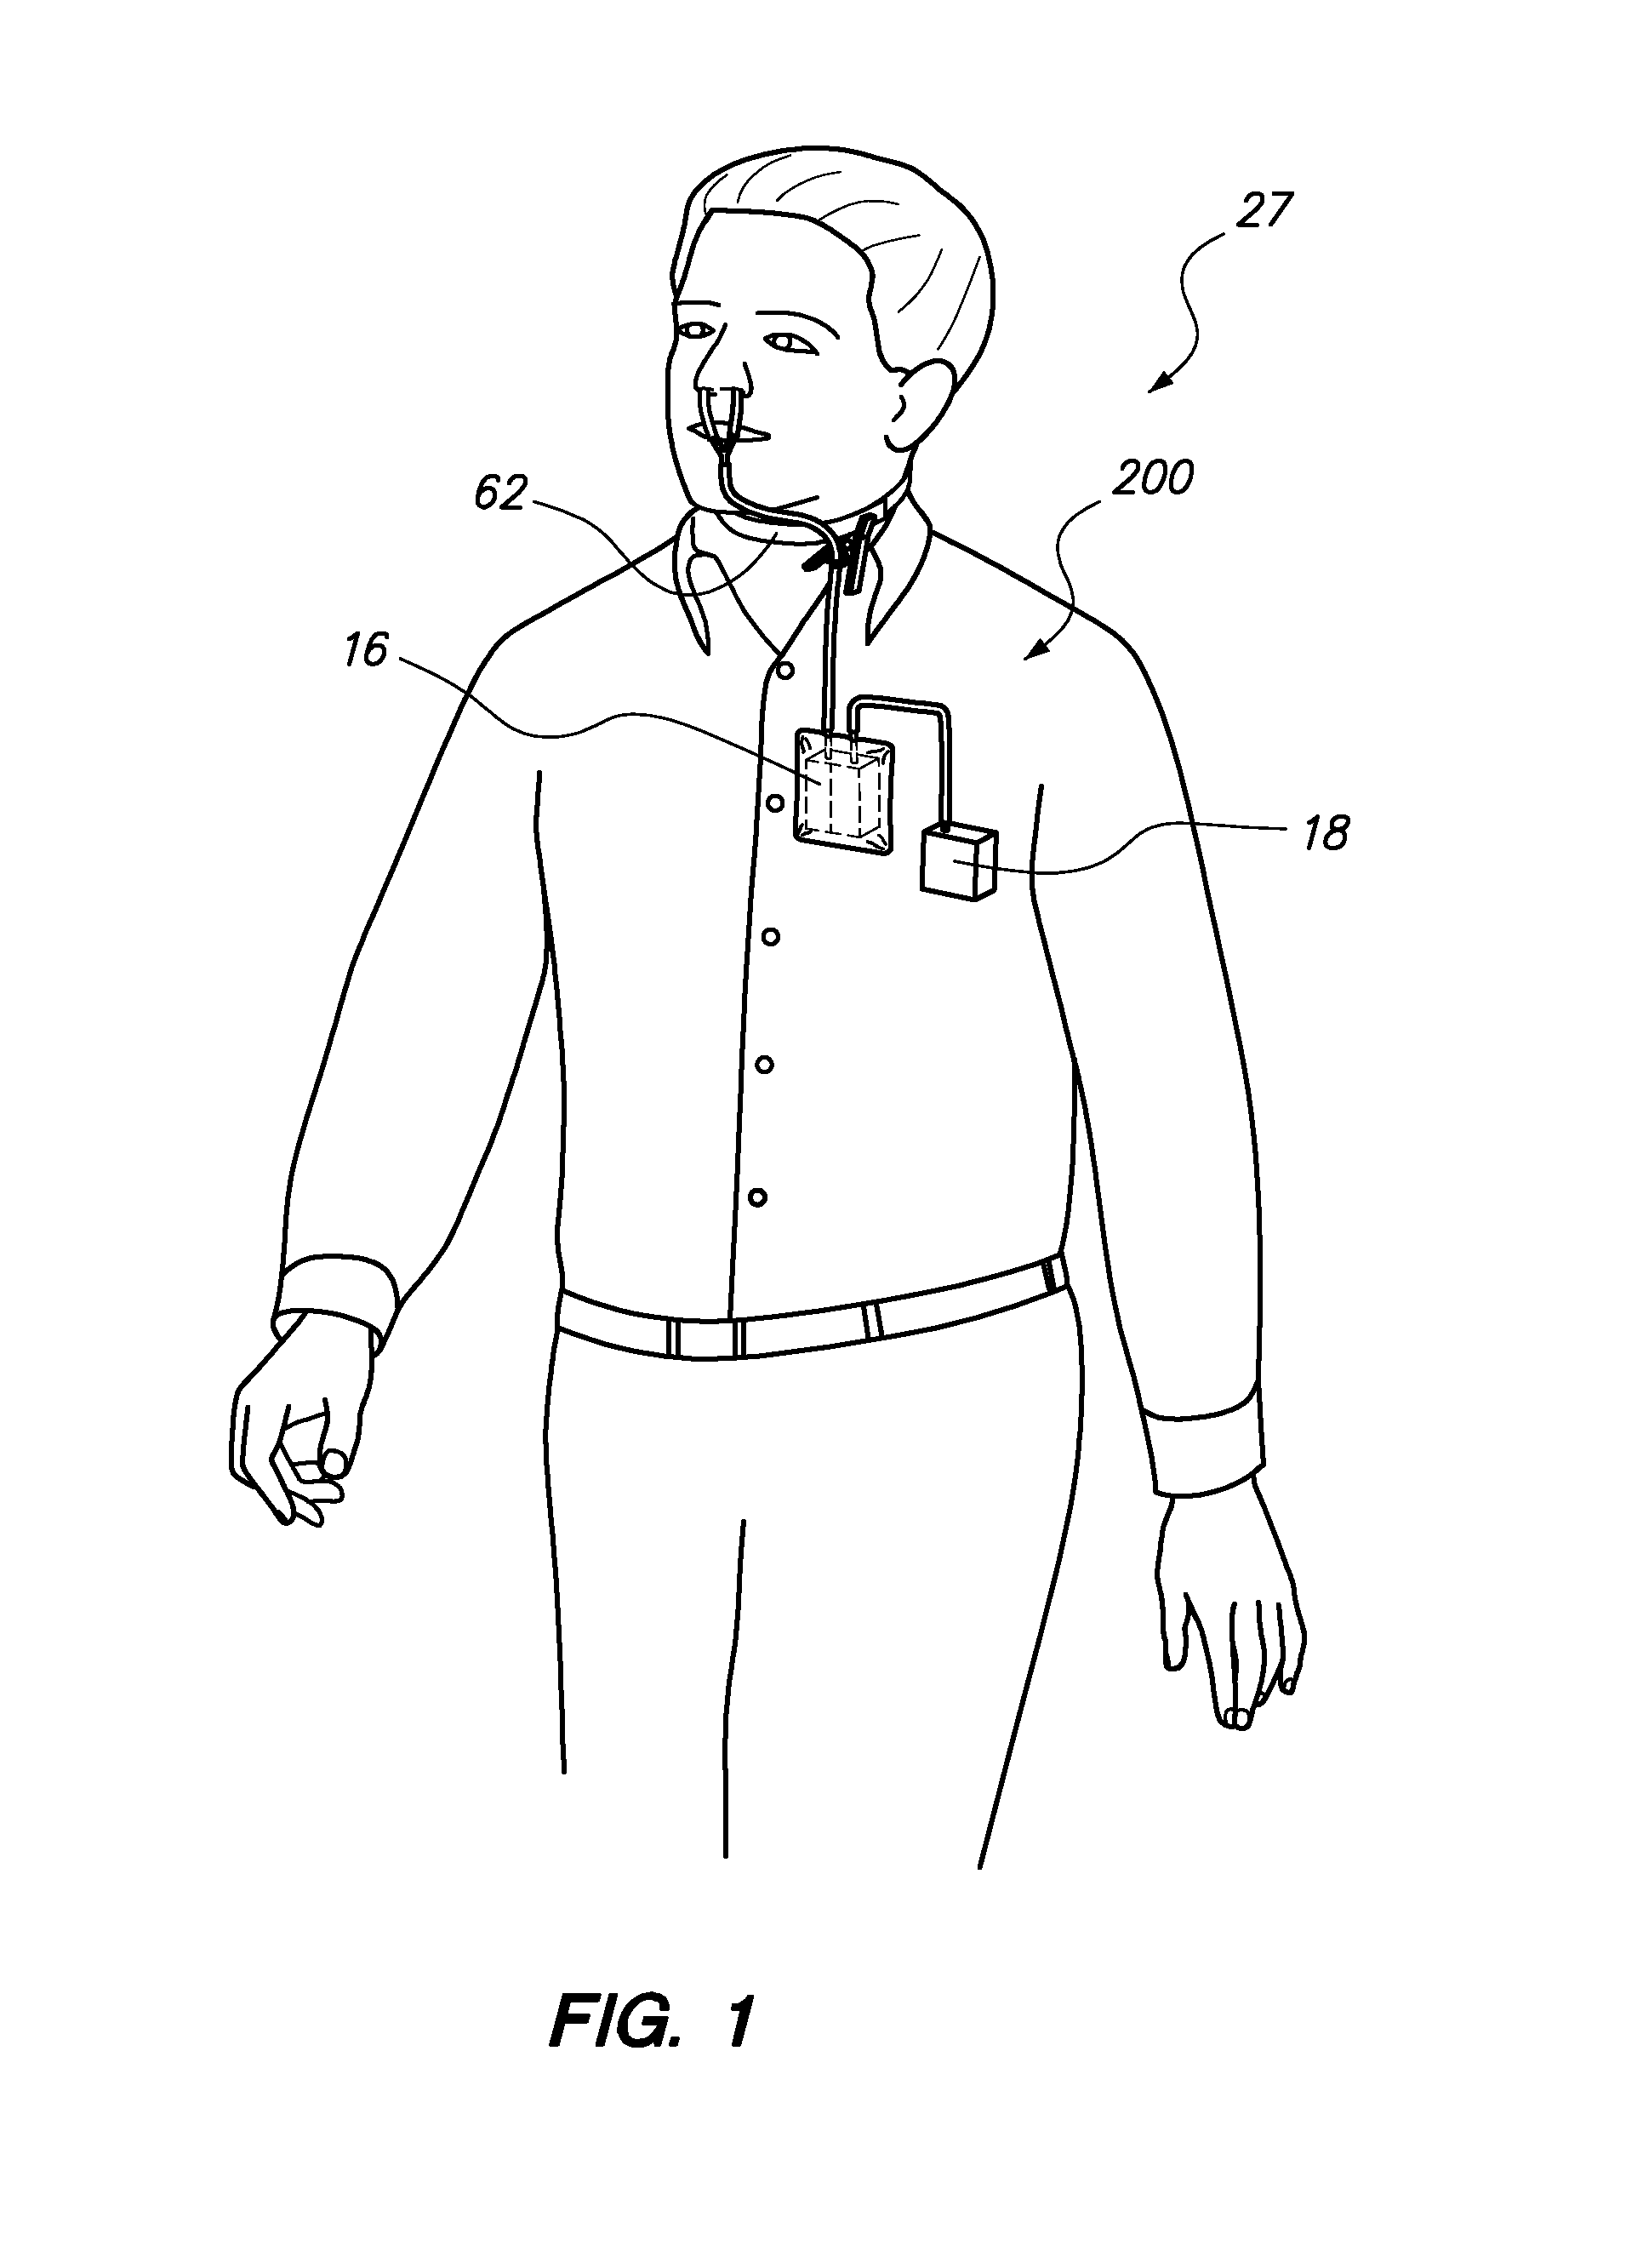 Portable, adjustable disposable medical suction system and method of use